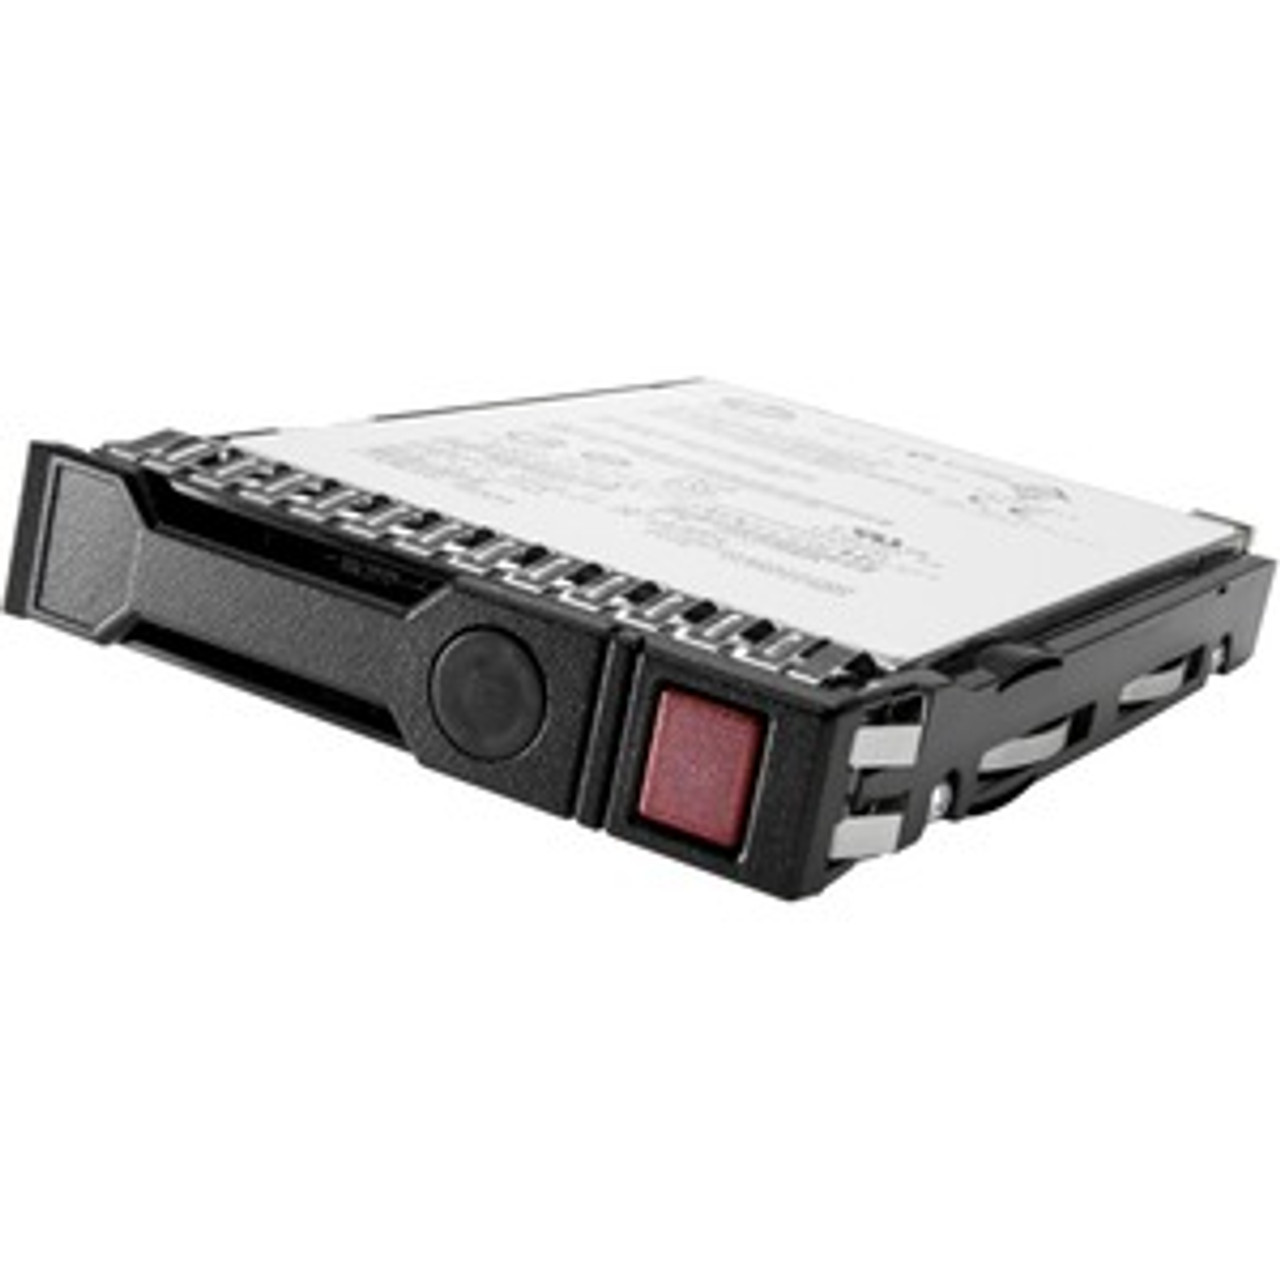 P18434-B21#0D1 HPE 960GB SATA 6Gbps Mixed Use 2.5-inch Internal Solid State Drive (SSD)